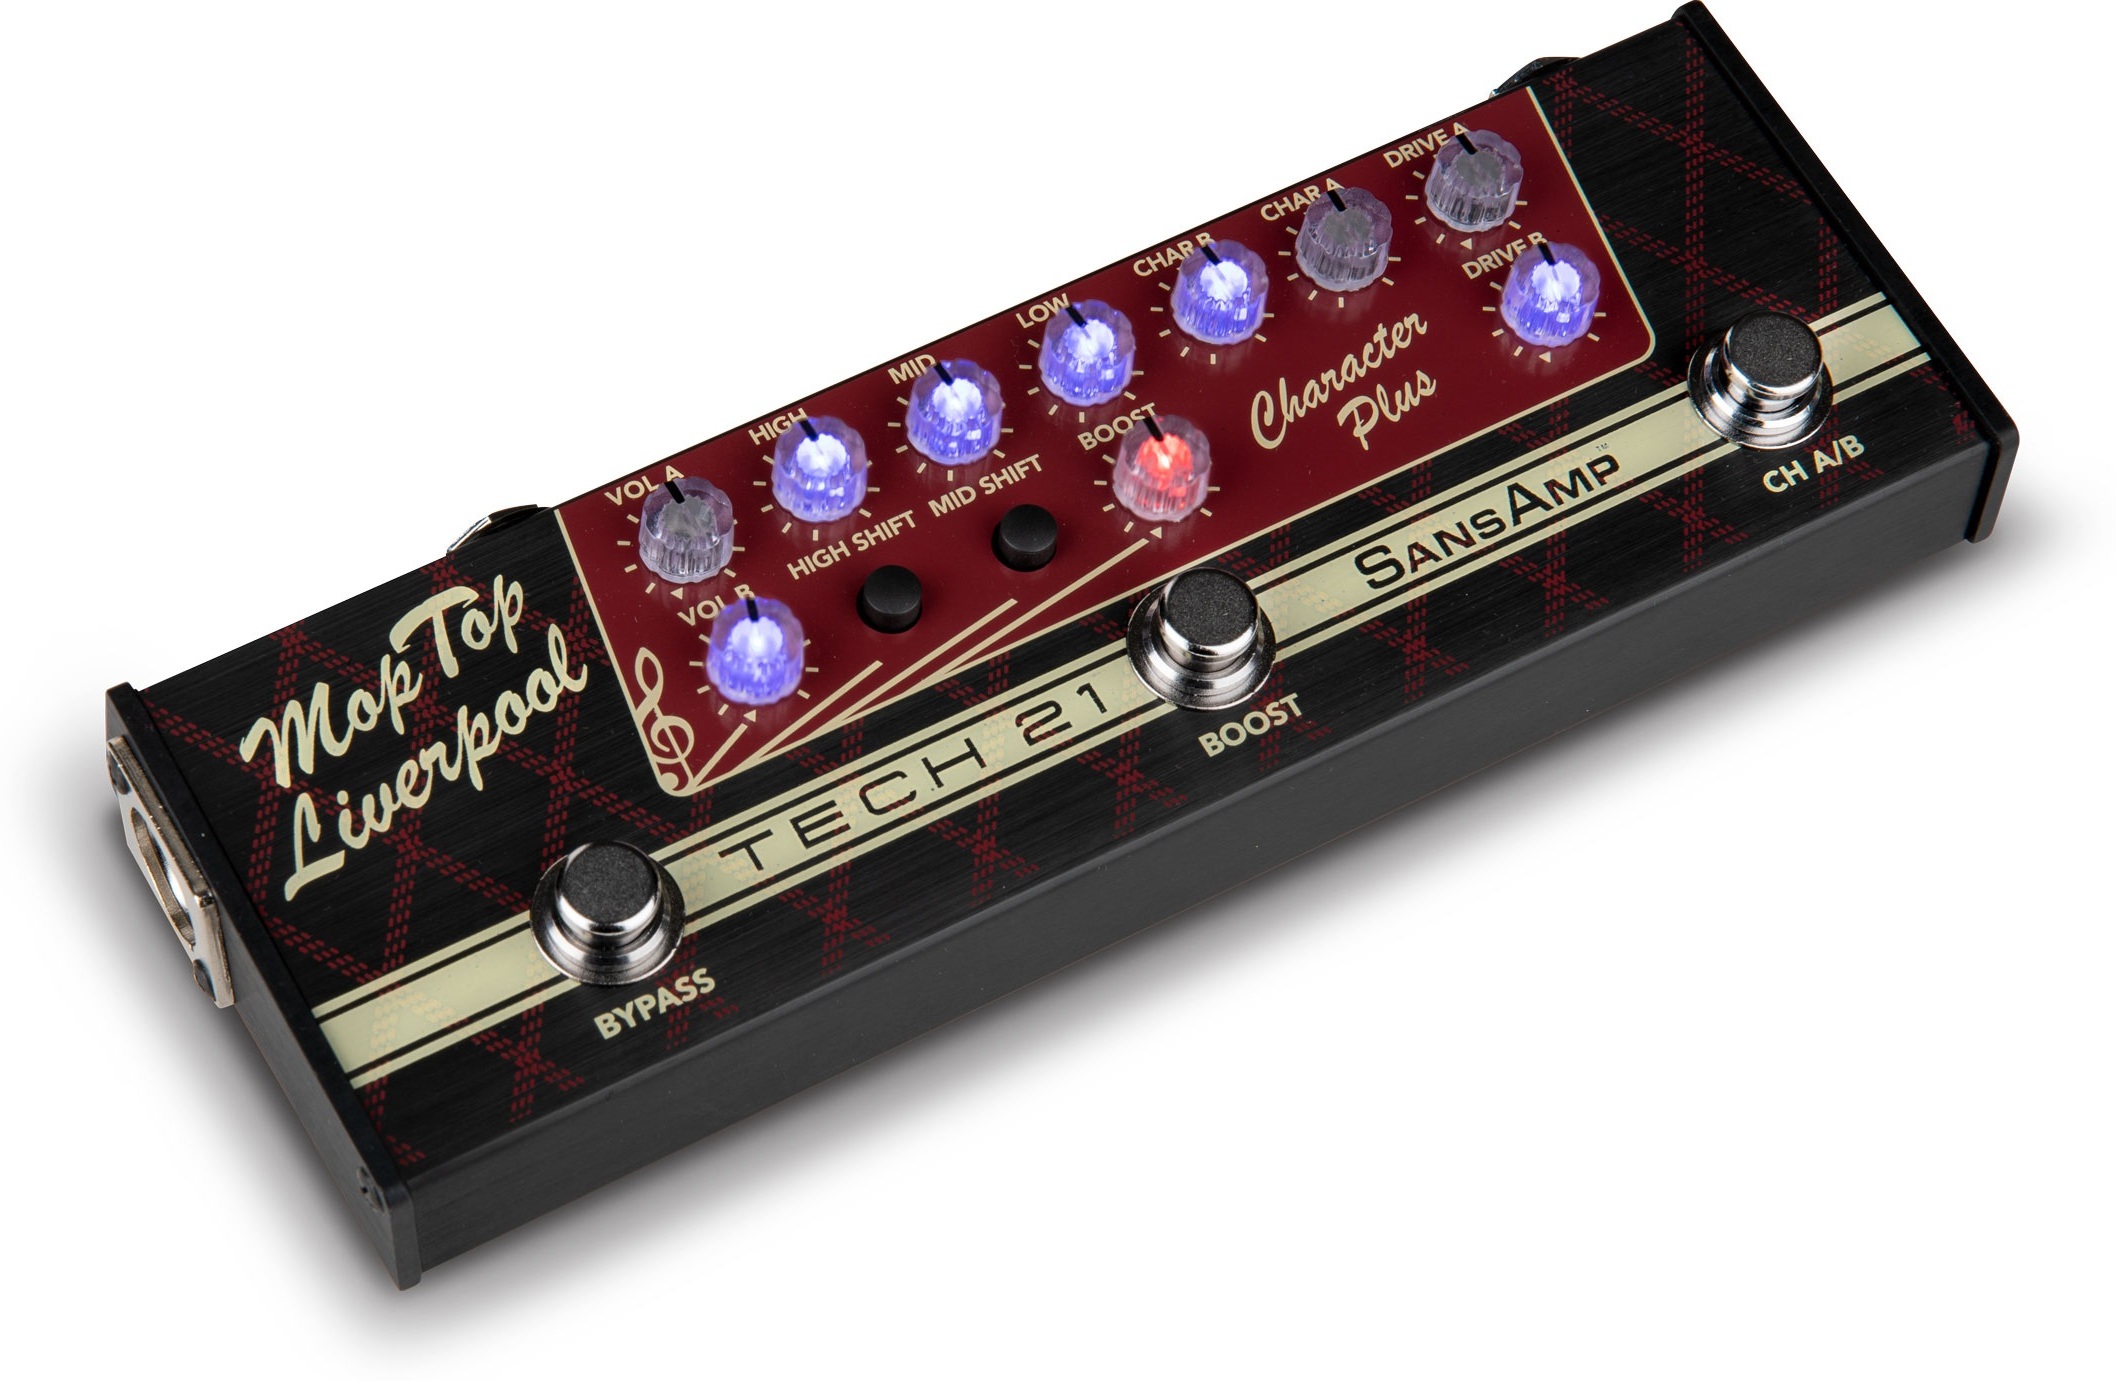 Tech 21 Mop Top Liverpool Character Series - Guitar amp modeling simulation - Main picture